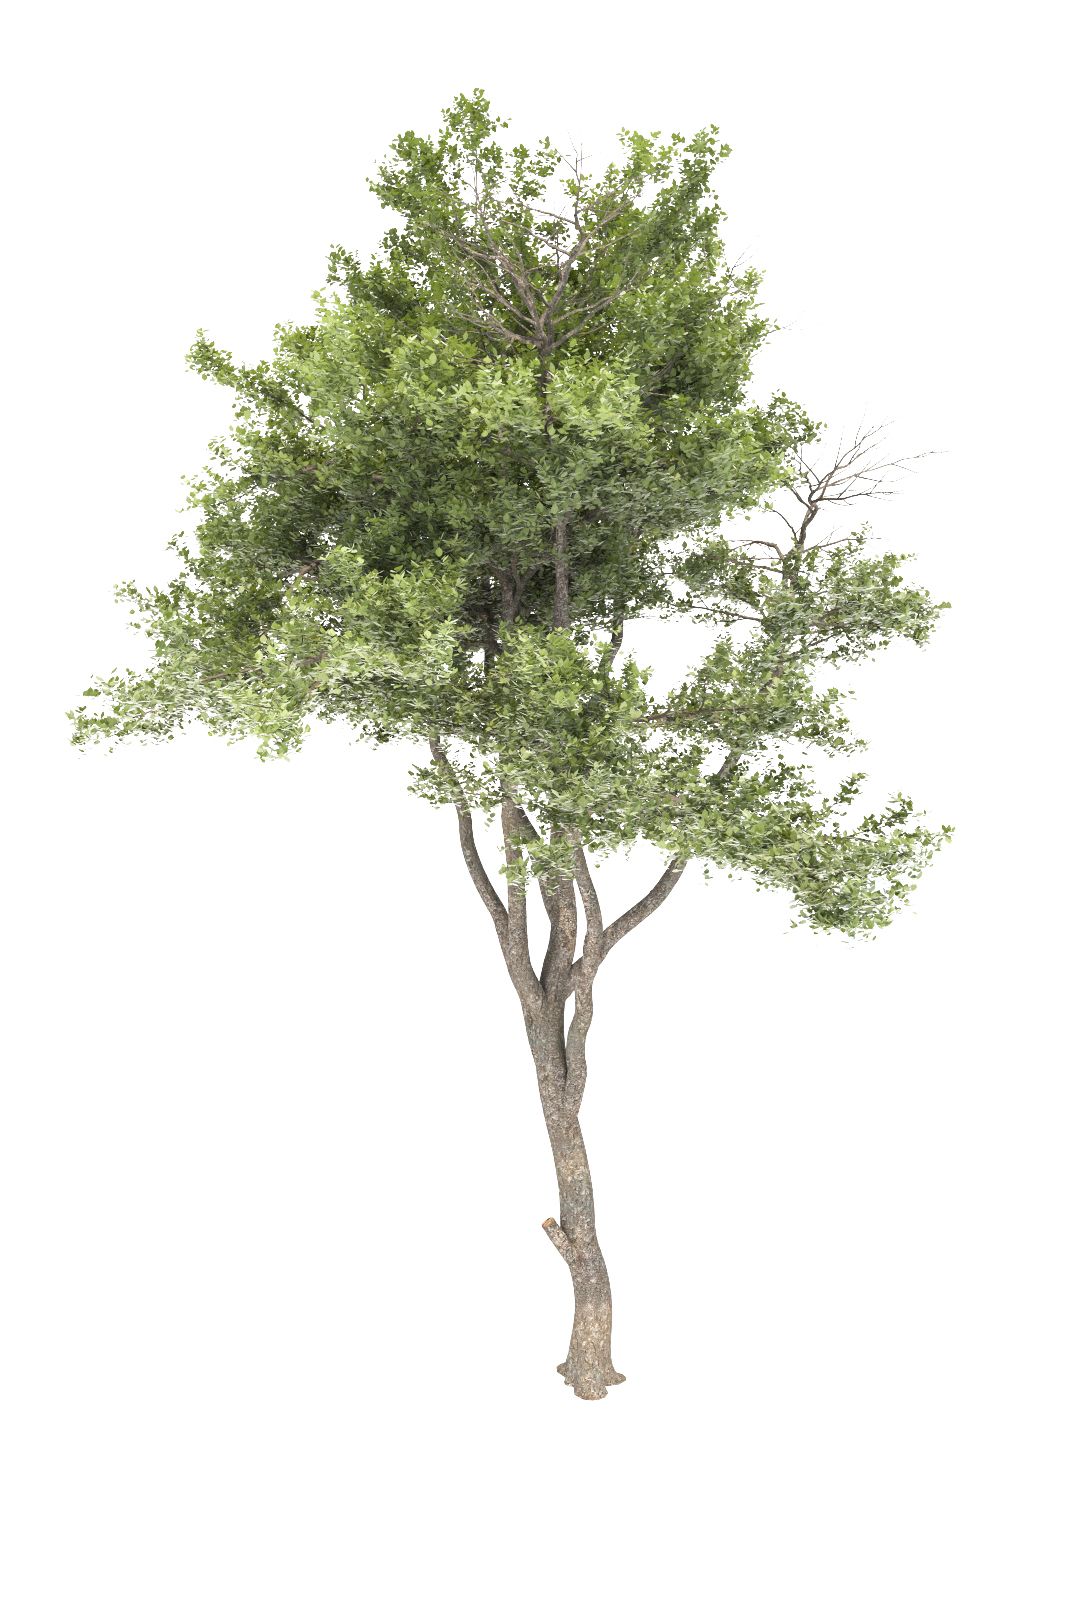 vray proxy trees free download